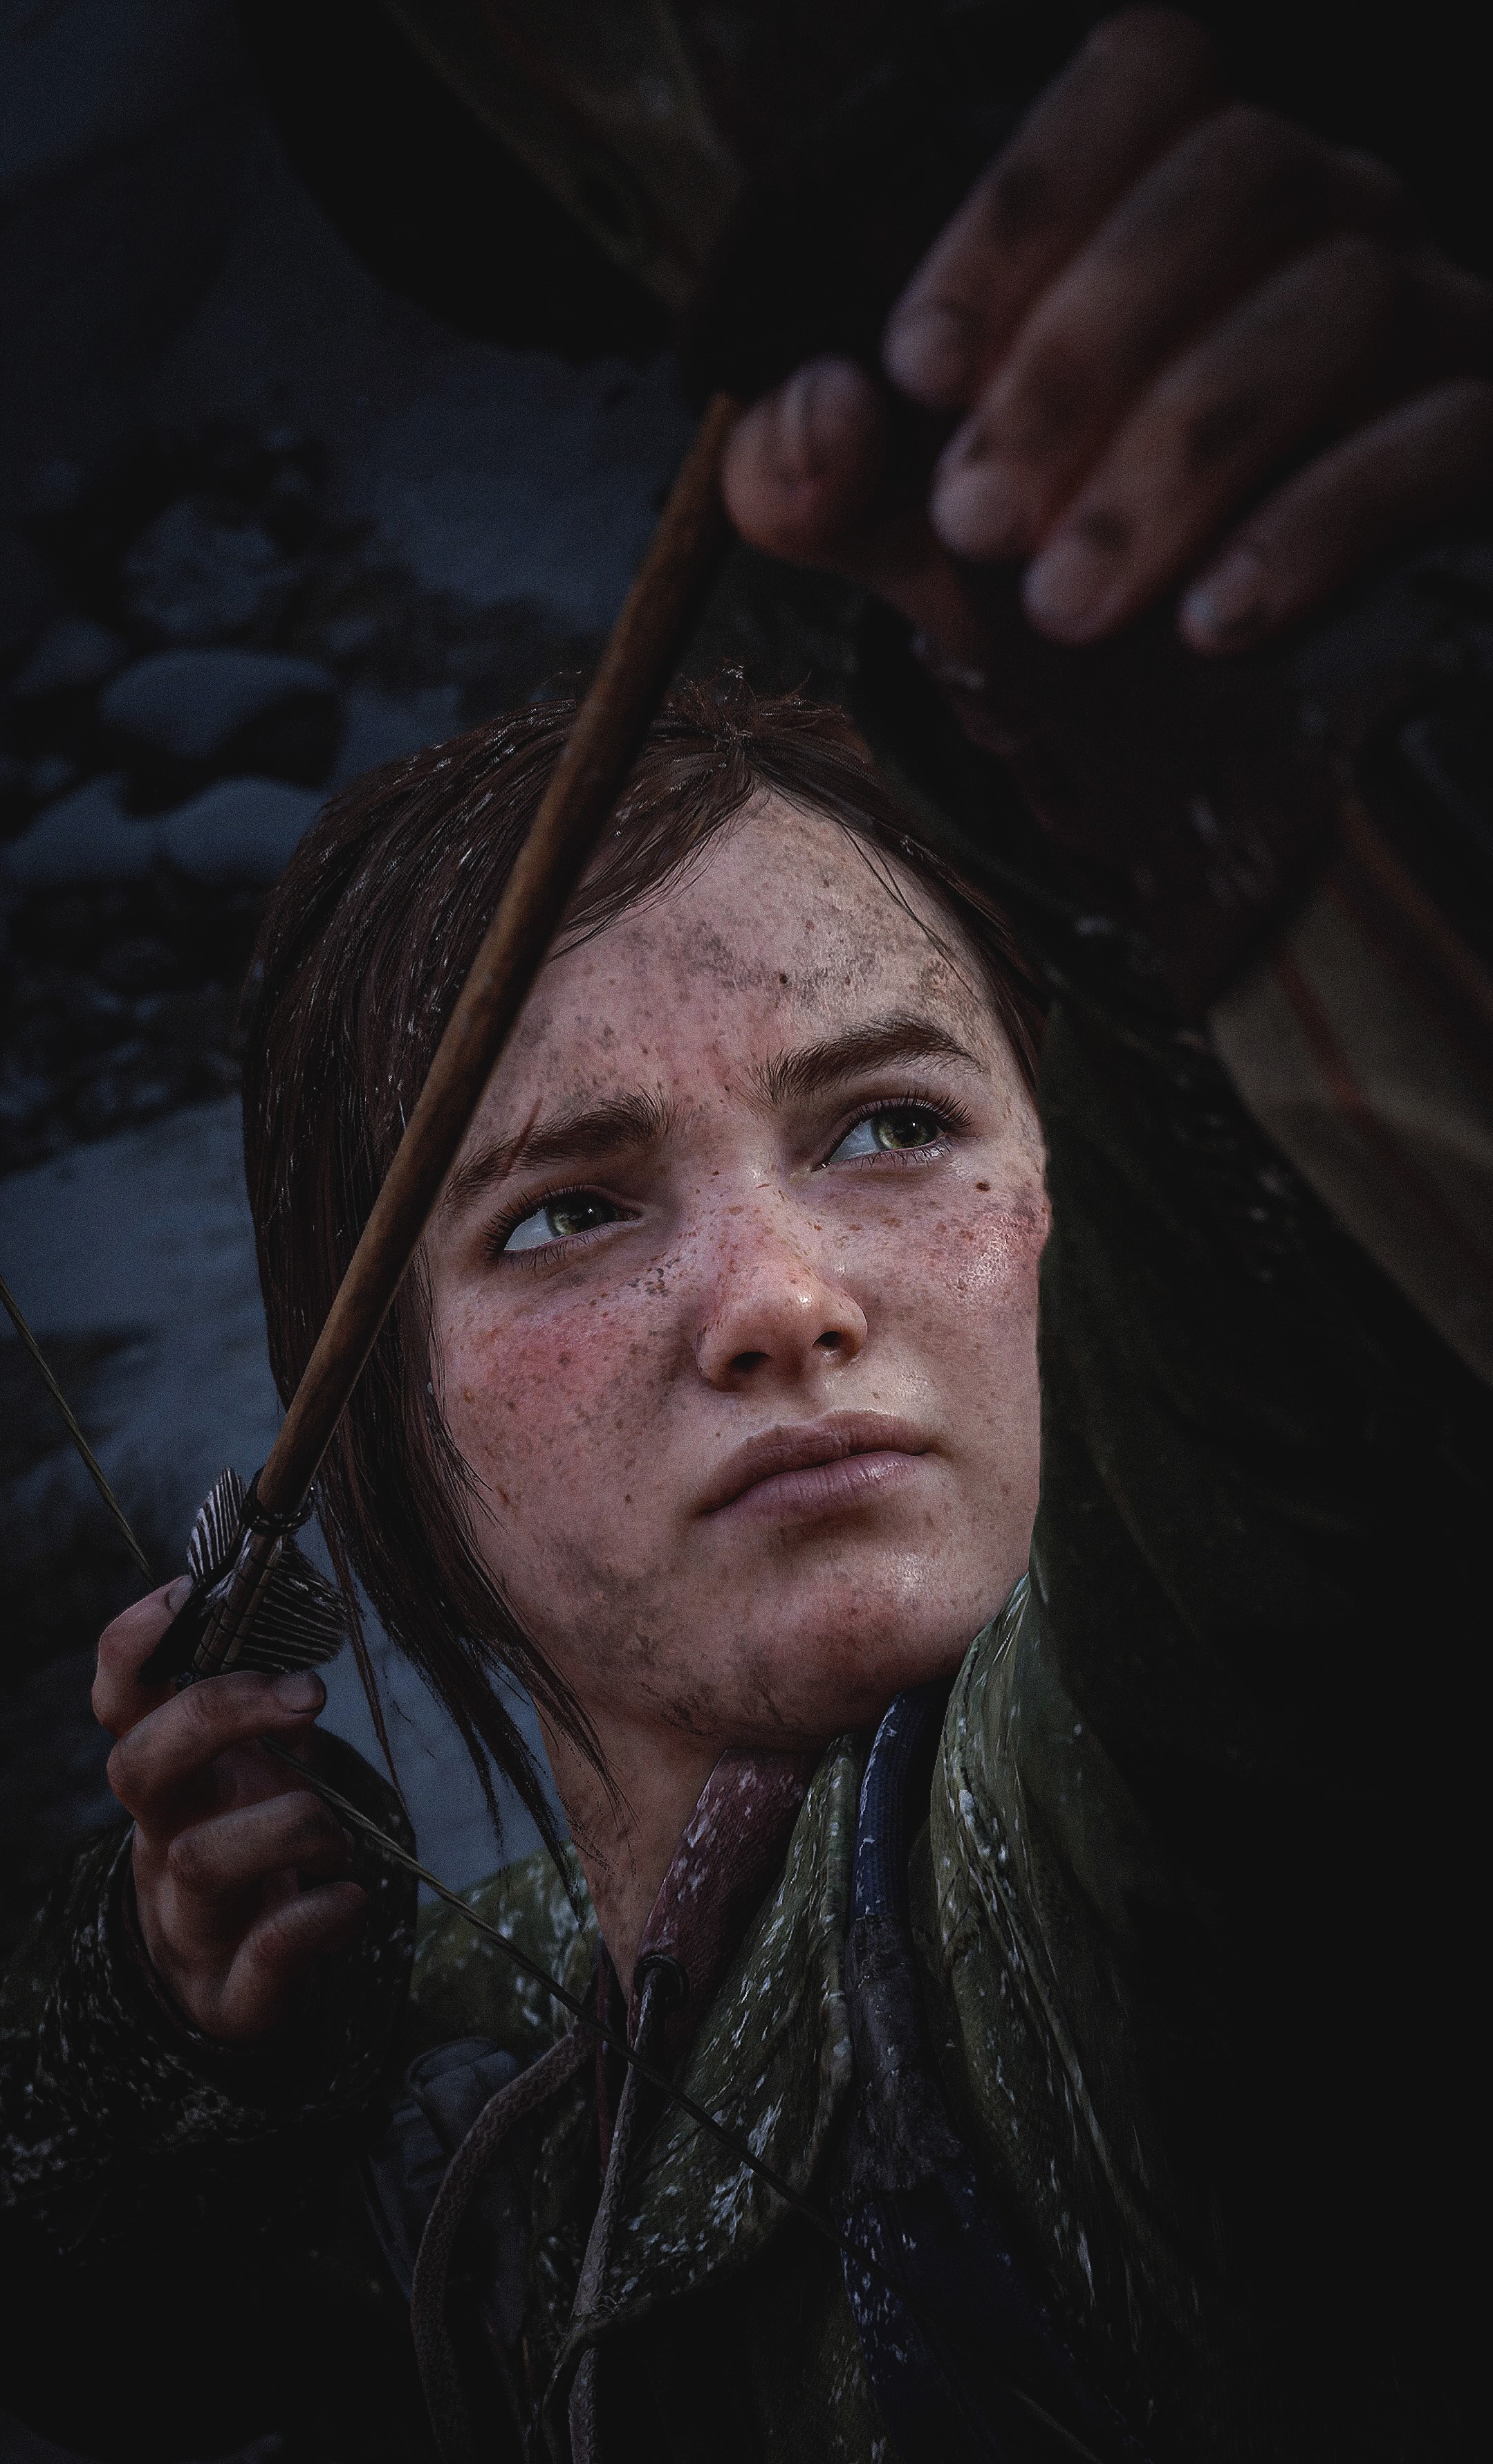 Wallpaper : The Last of Us, Ellie Williams, Naughty Dog, Sony